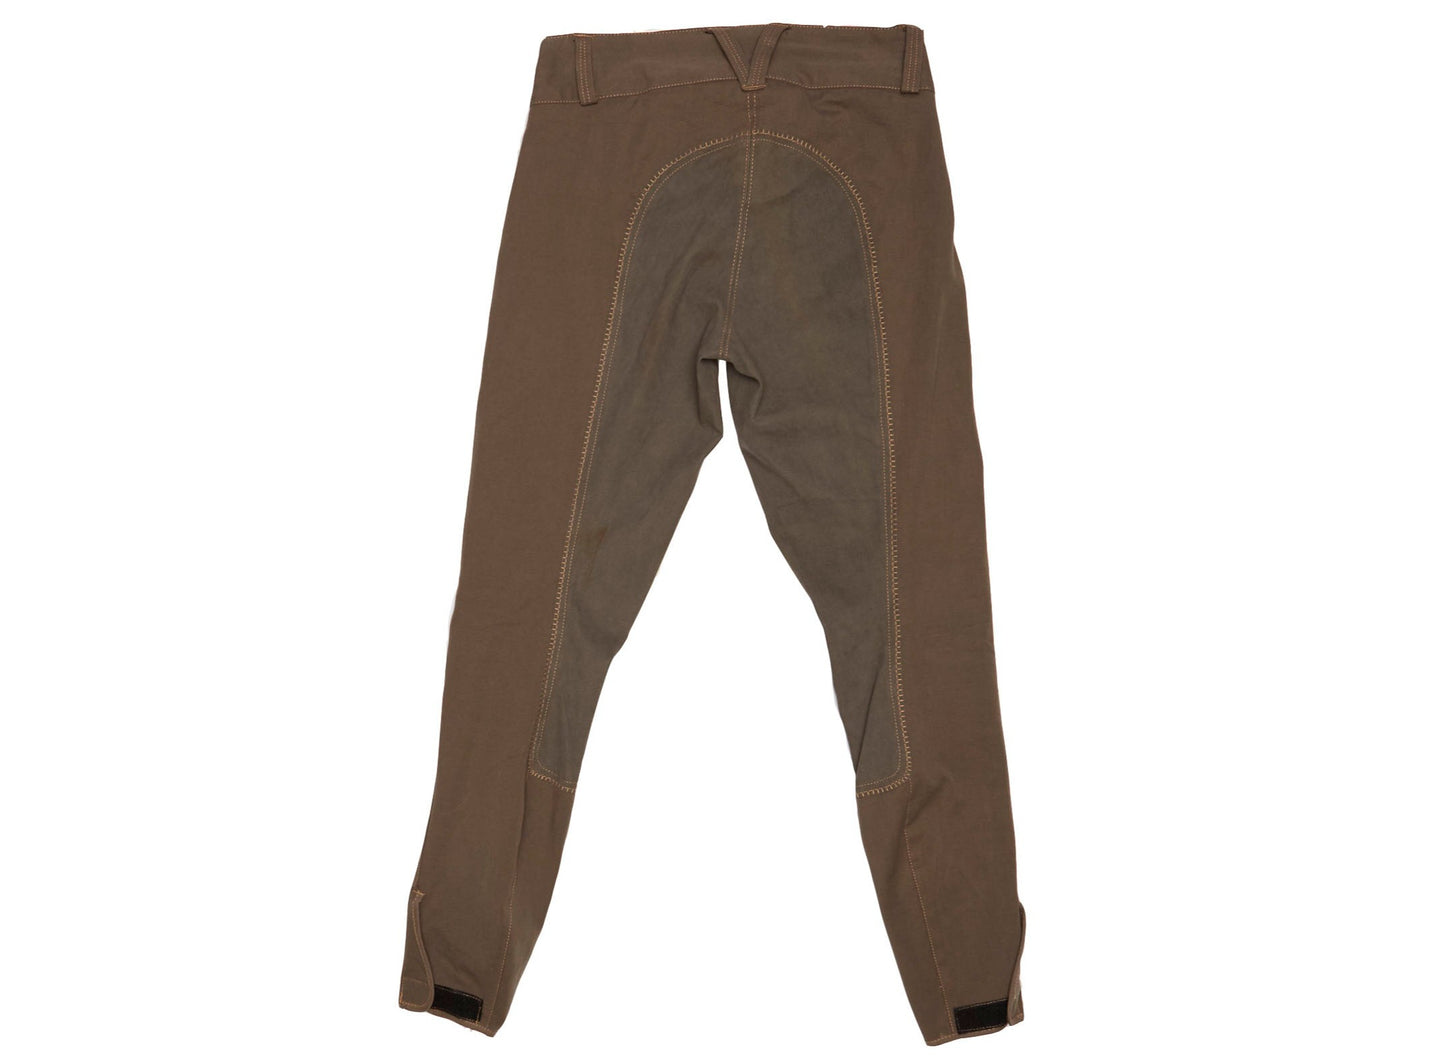 Womens Mountain Horse Trousers - W28" L29"